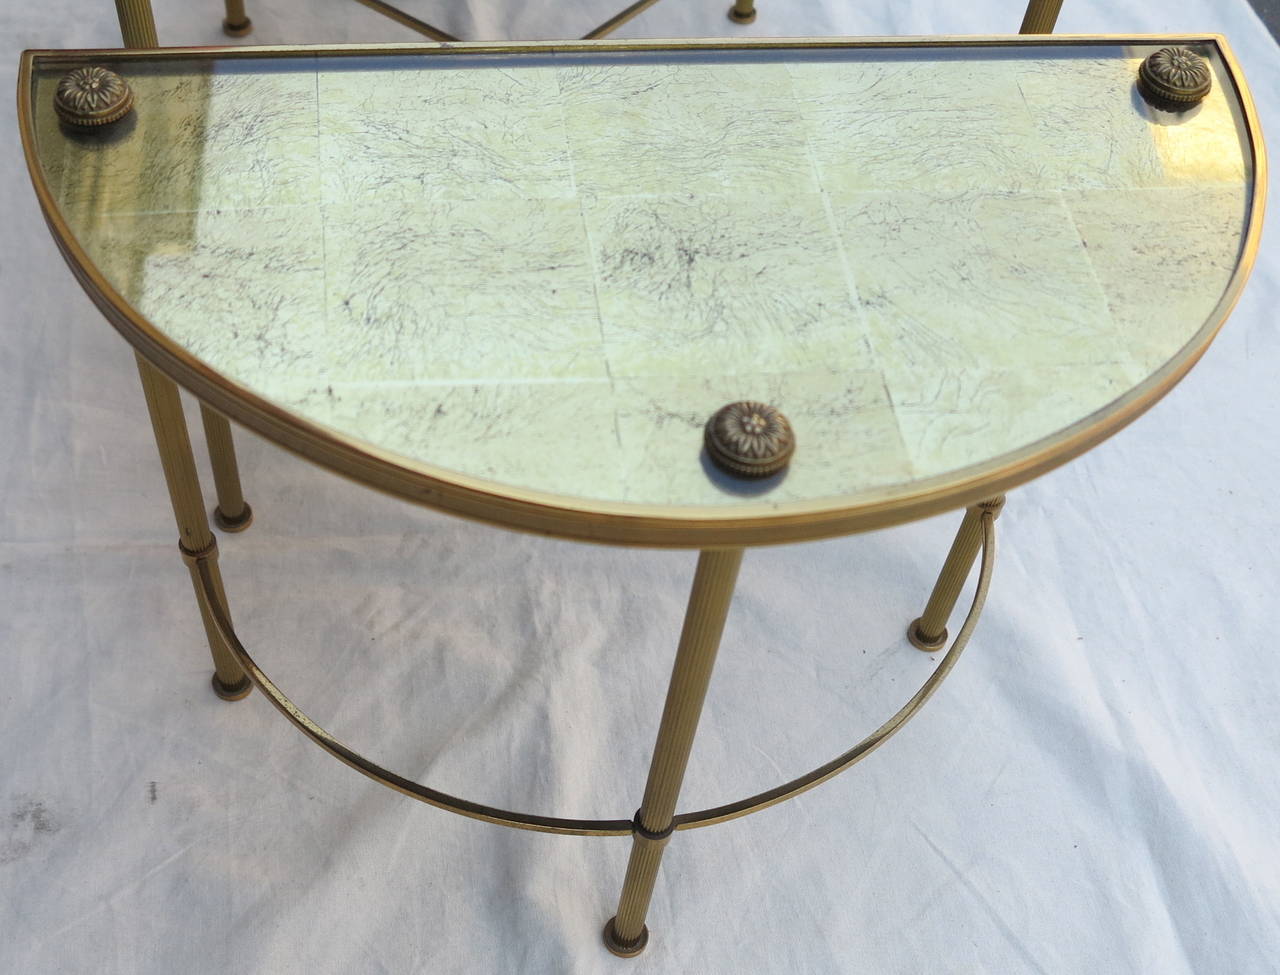 Coffee table in three parts with bronze structure and brass, trays in glass gilt with sheet, central part 61 X 50 cm and 2 ends 51 X 26, circa 1950-1970, good condition.